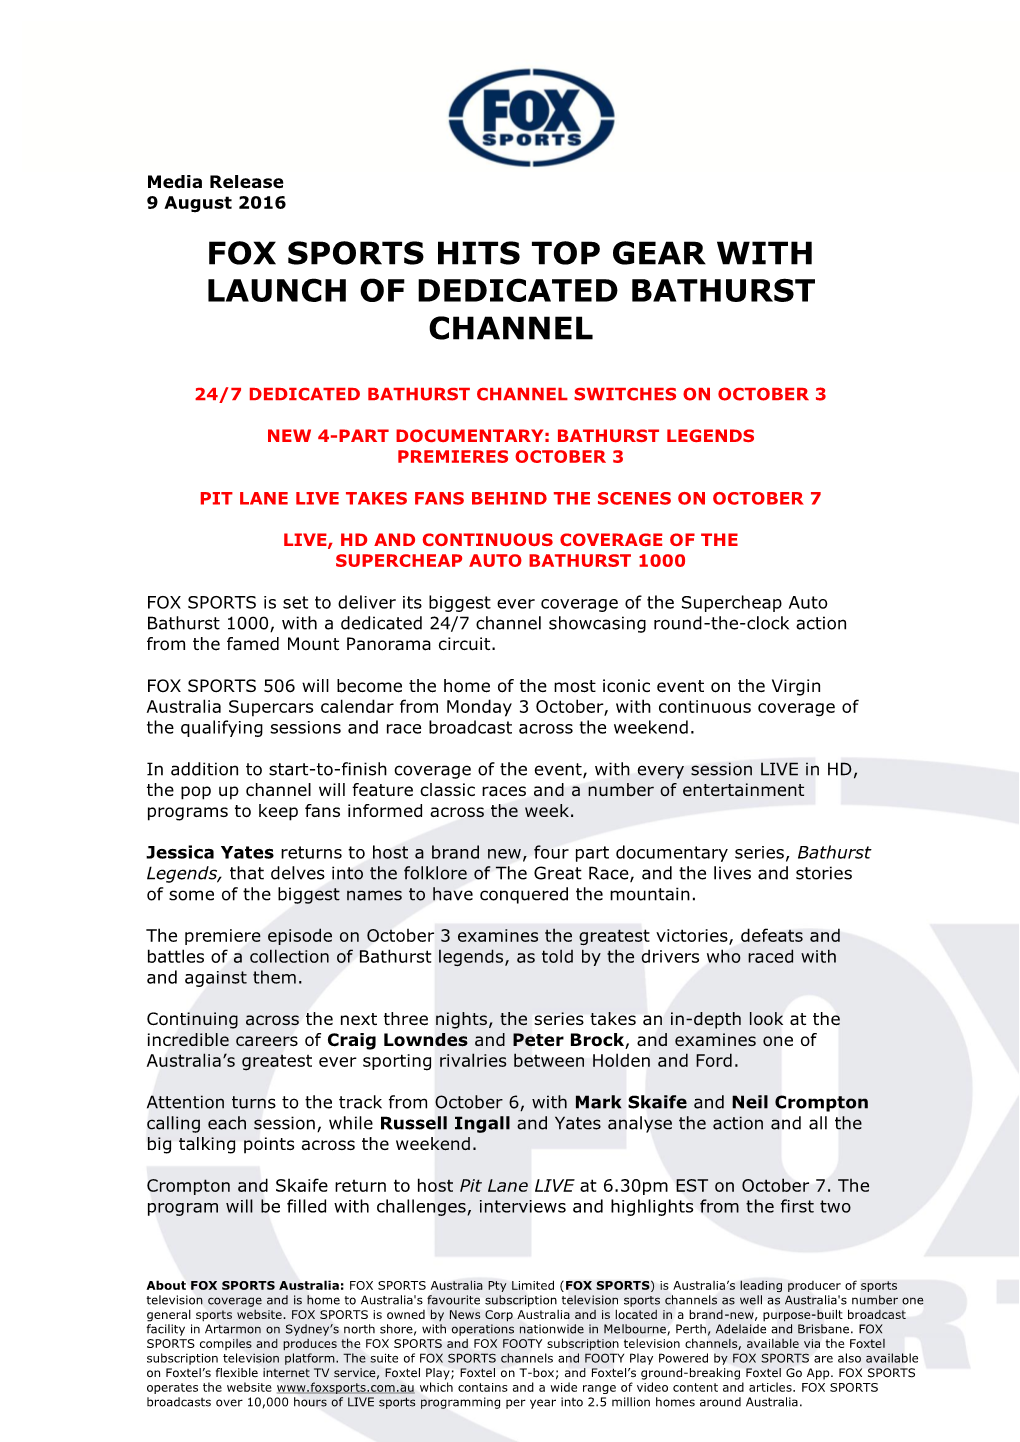 Fox Sports Hits Top Gear with Launch of Dedicated Bathurst Channel